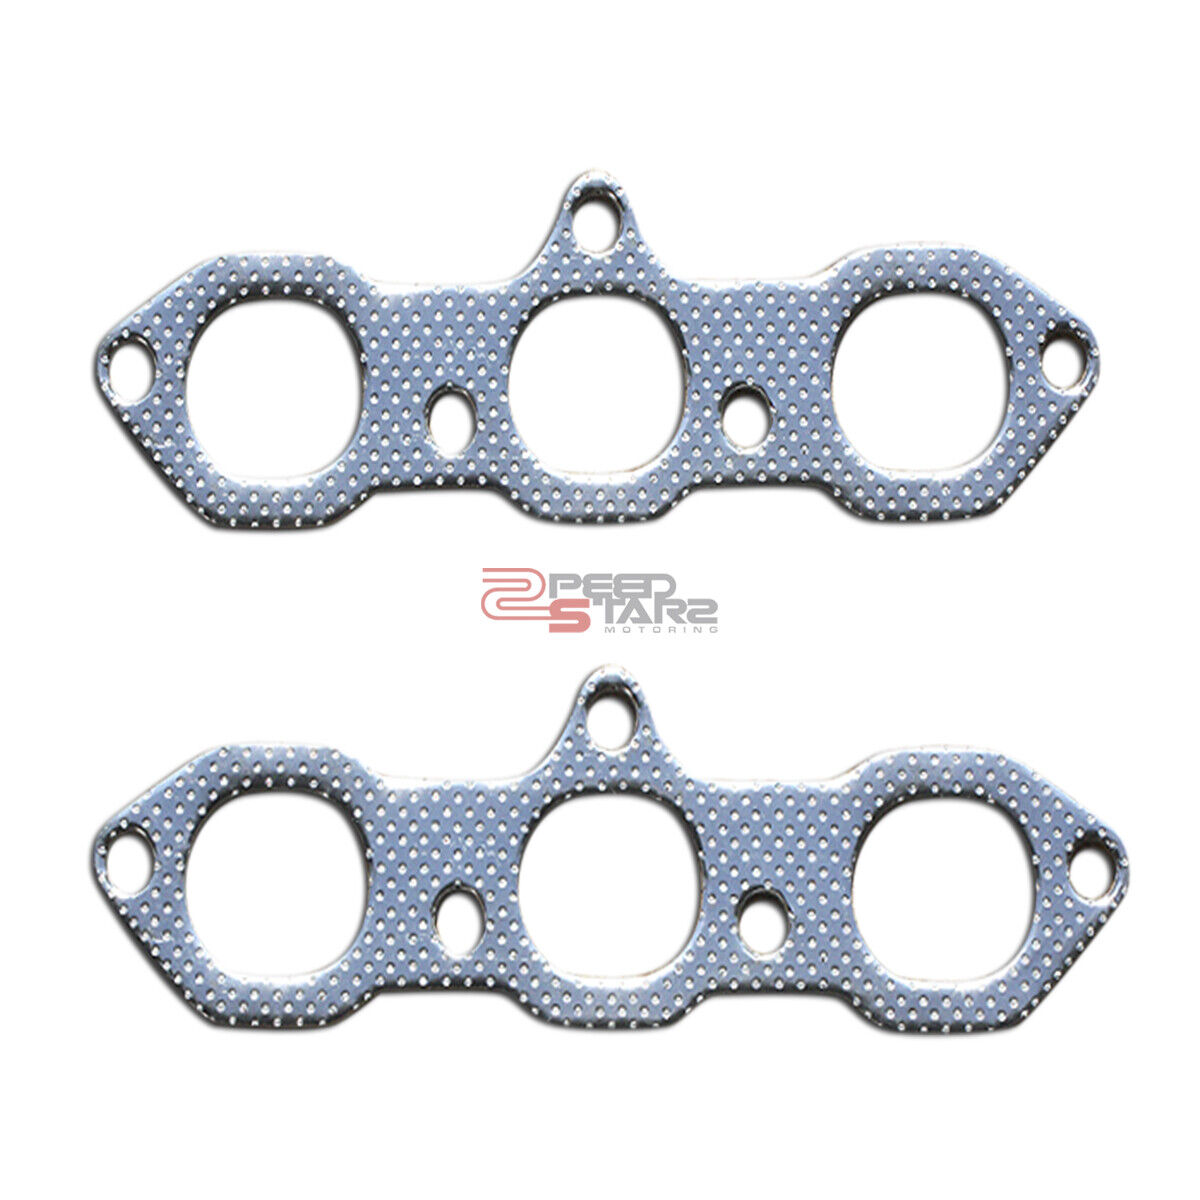 FOR 98-02 ACCORD V6 J30A1 6CYL TURBO/CHARGER/HEADER/MANIFOLD ALUMINUM GASKET